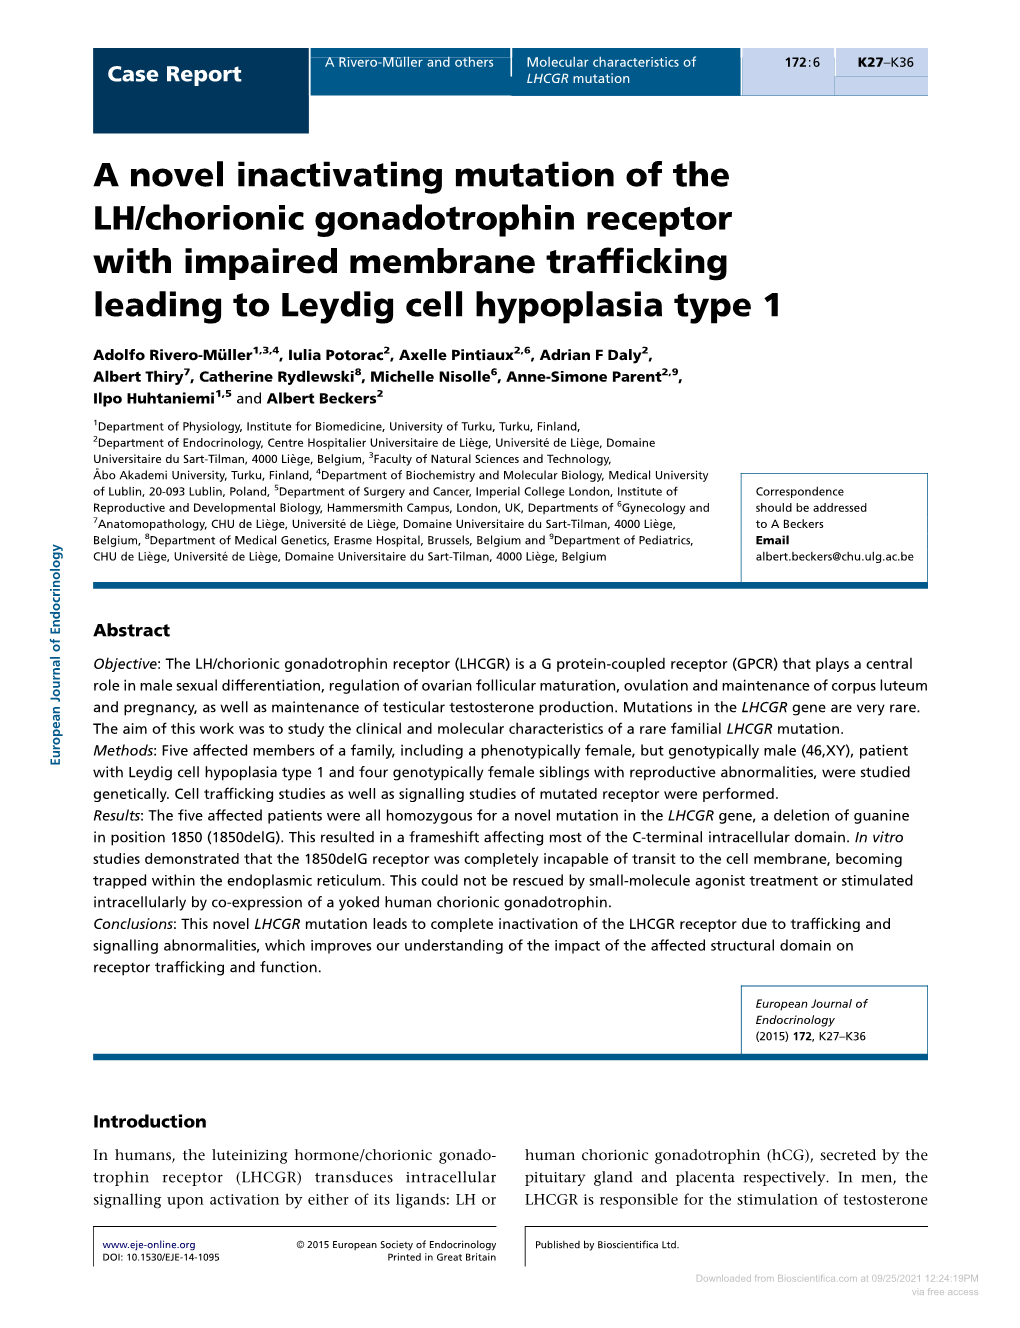 A Novel Inactivating Mutation of the LH/Chorionic Gonadotrophin Receptor with Impaired Membrane Trafﬁcking Leading to Leydig Cell Hypoplasia Type 1